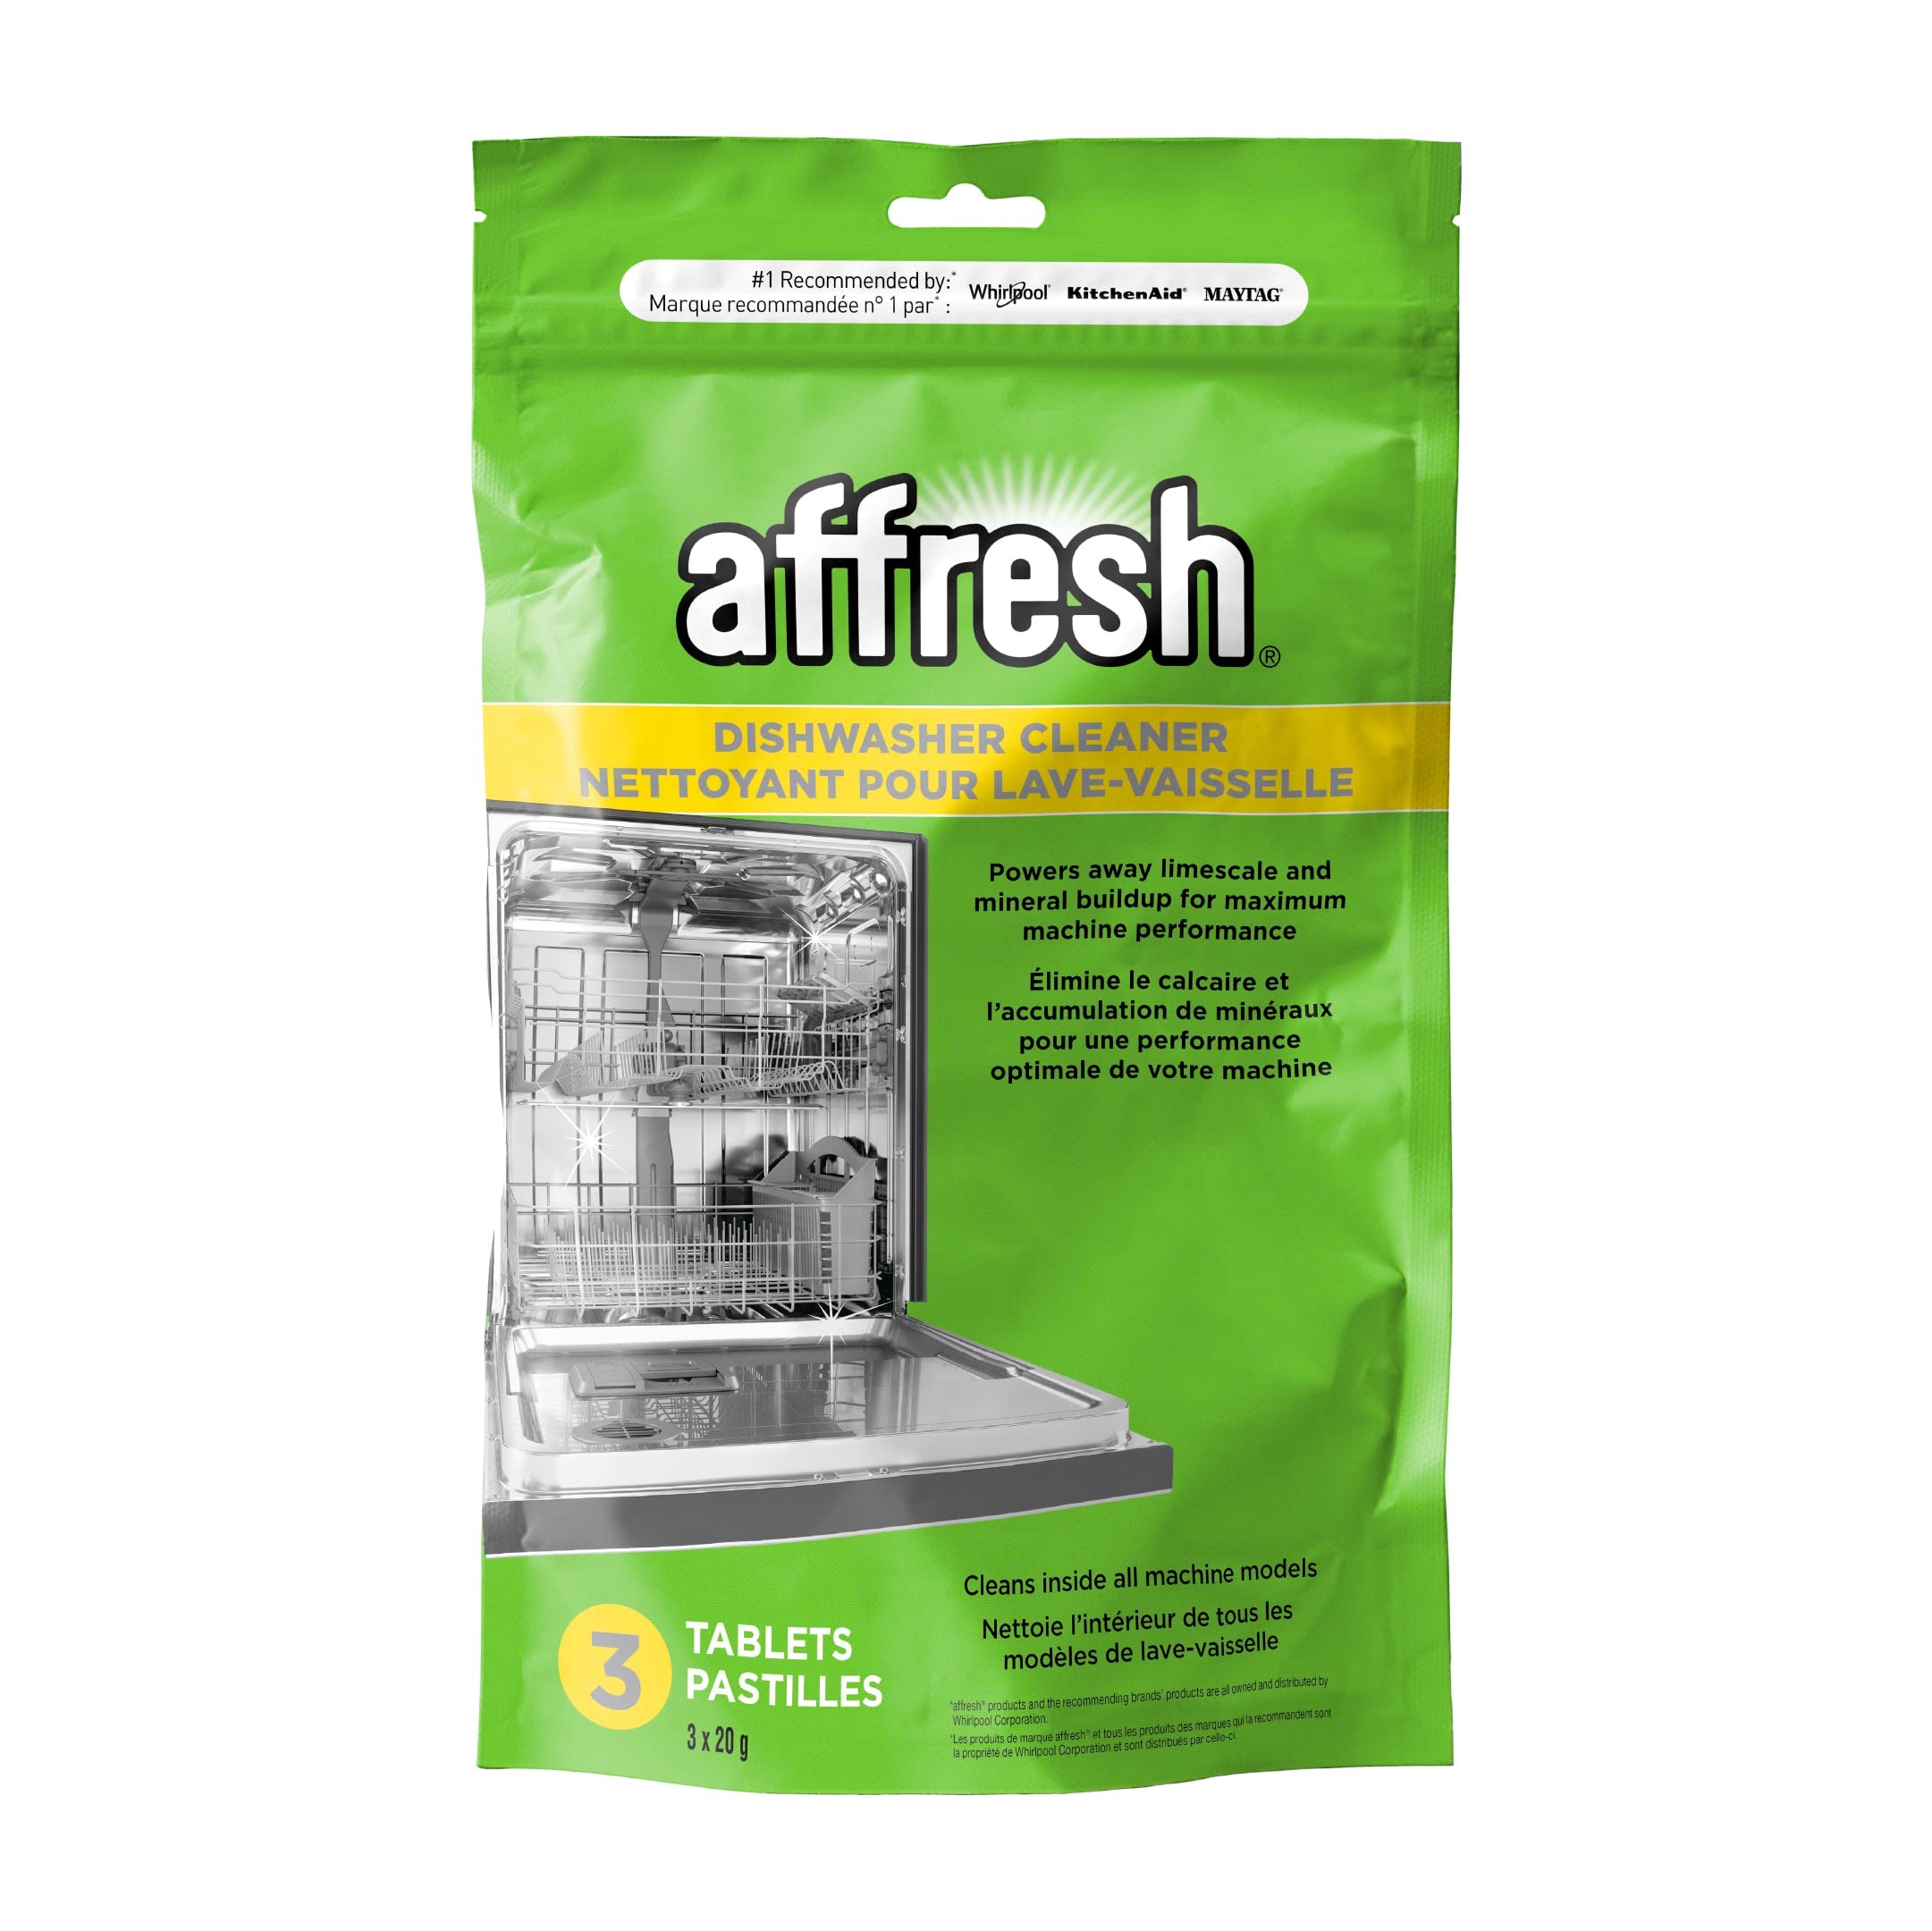 Affresh Dishwasher Cleaner, 3 Tablets (3 Months Supply) : Amazon.ca: Health & Personal Care